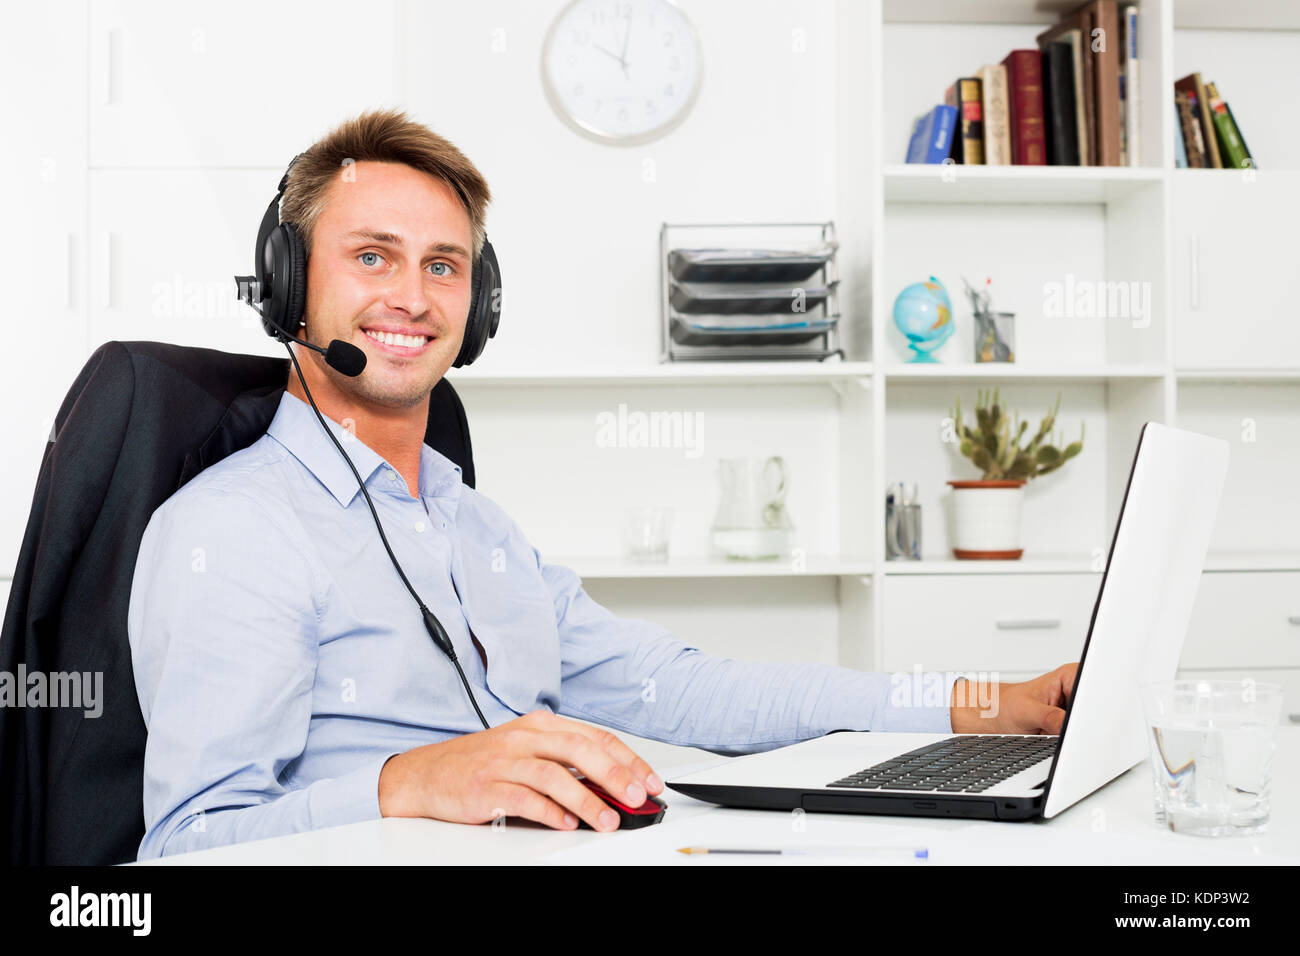 Smiling young man talking using hands-free set at customer service office Stock Photo